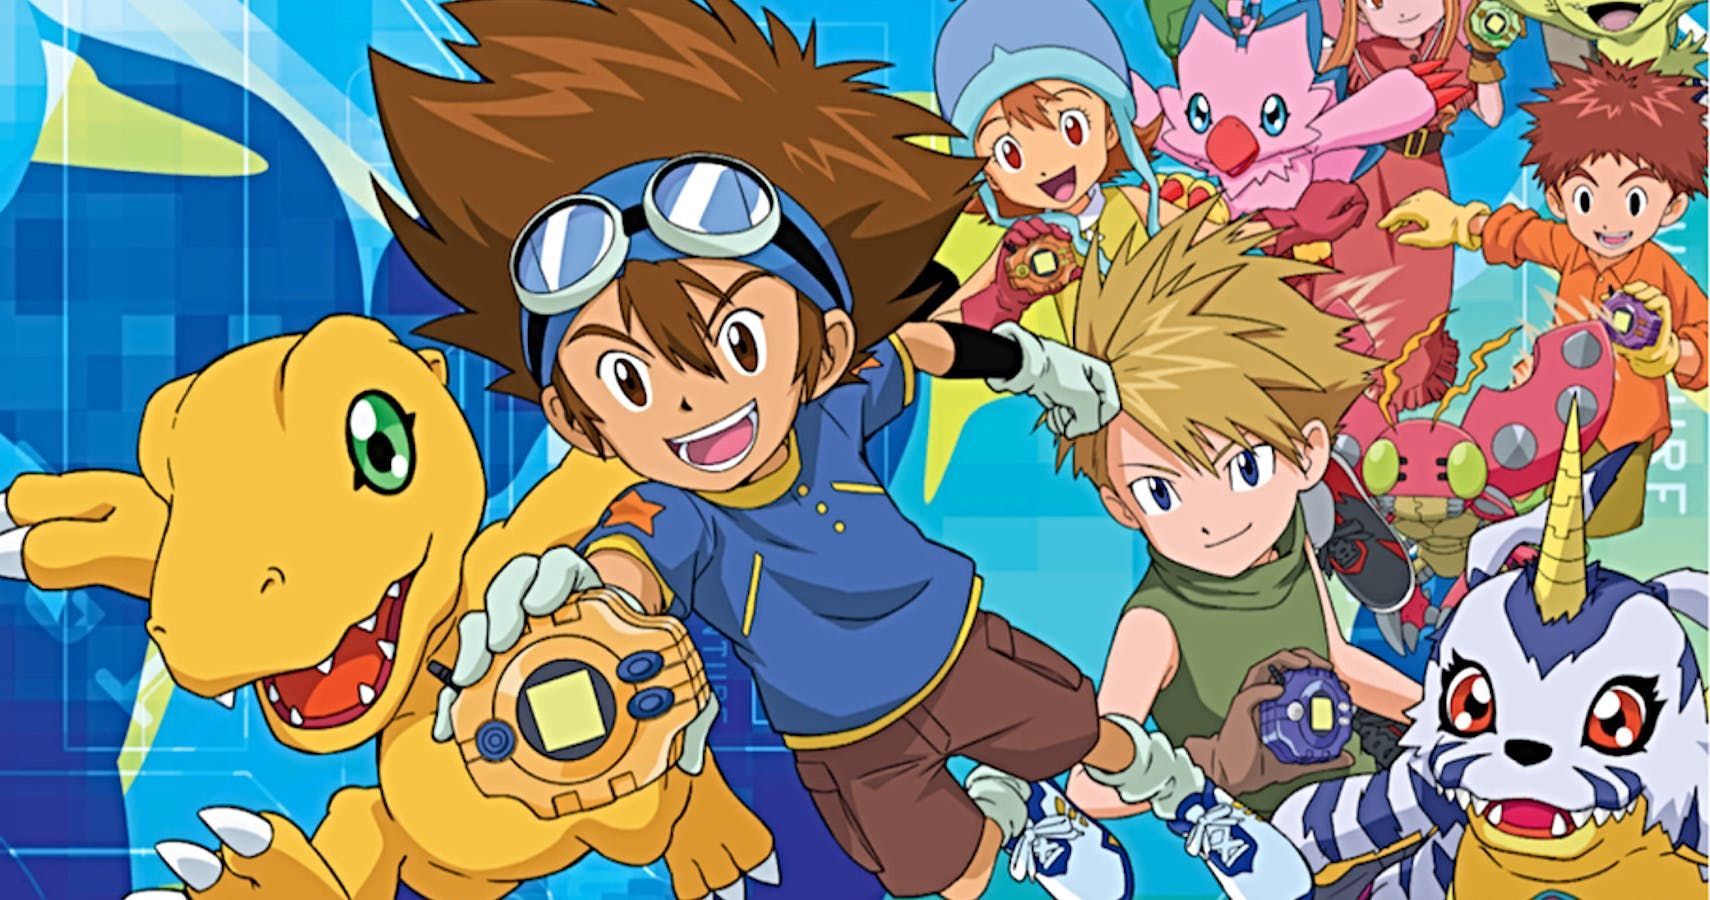 Taichi, Agumon and the rest of the cast of Digimon Adventure.